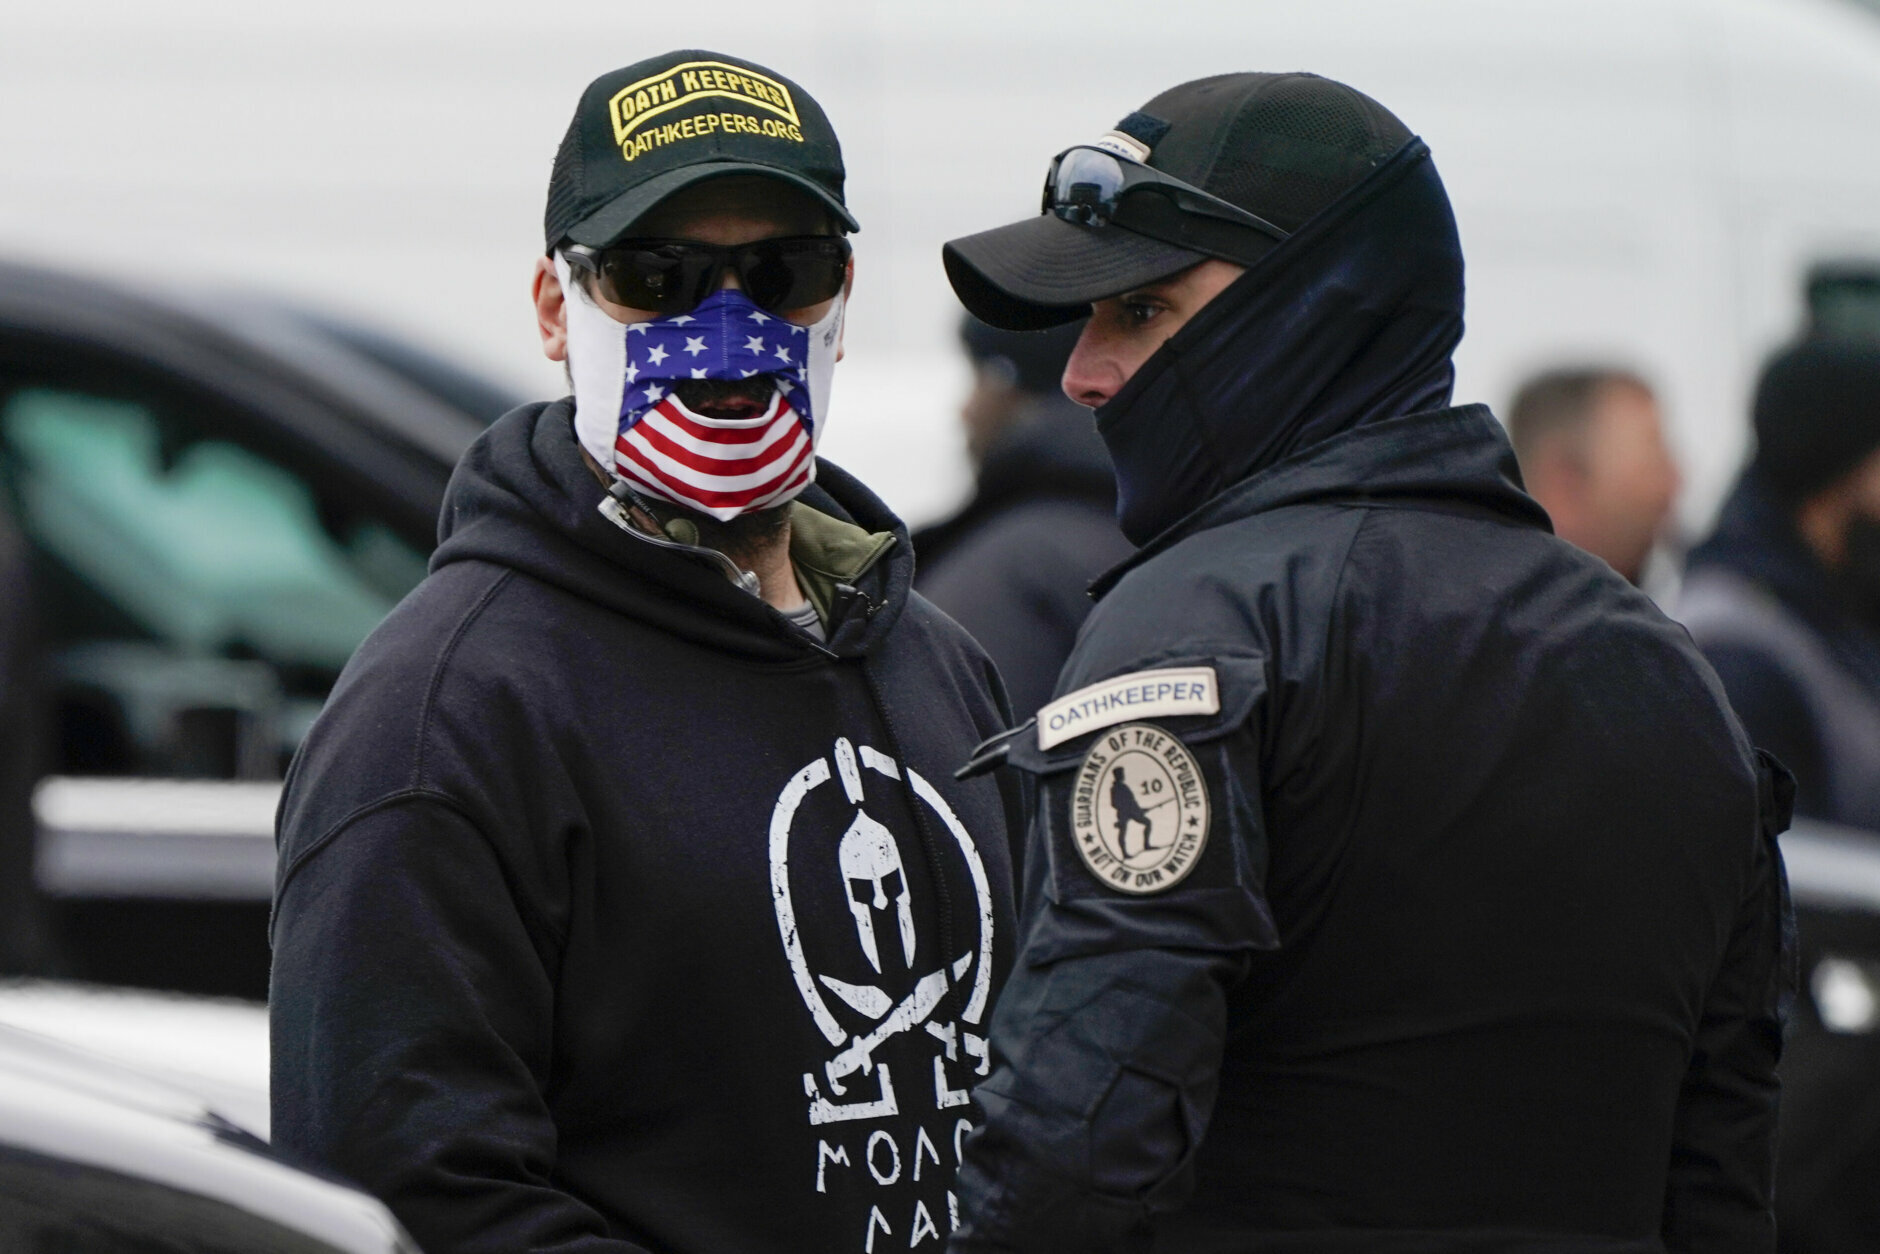 People wearing hats and patches indicating they are part of Oath Keepers attend a rally at Freedom Plaza Tuesday, Jan. 5, 2021, in Washington, in support of President Donald Trump. (AP Photo/Jacquelyn Martin)